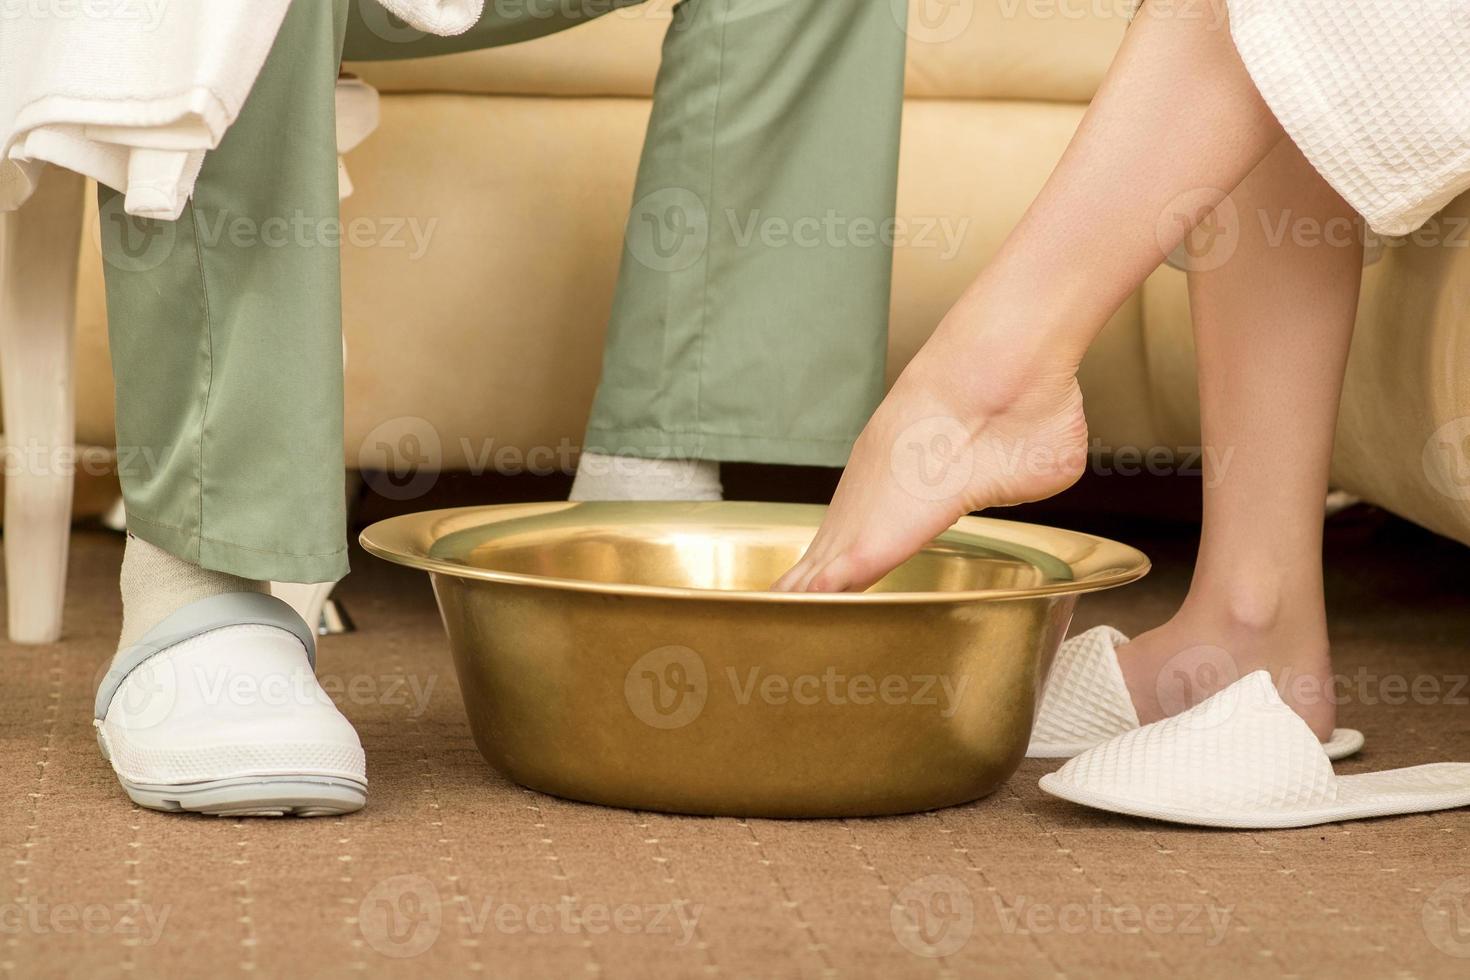 Woman is dipping feet in bowl photo